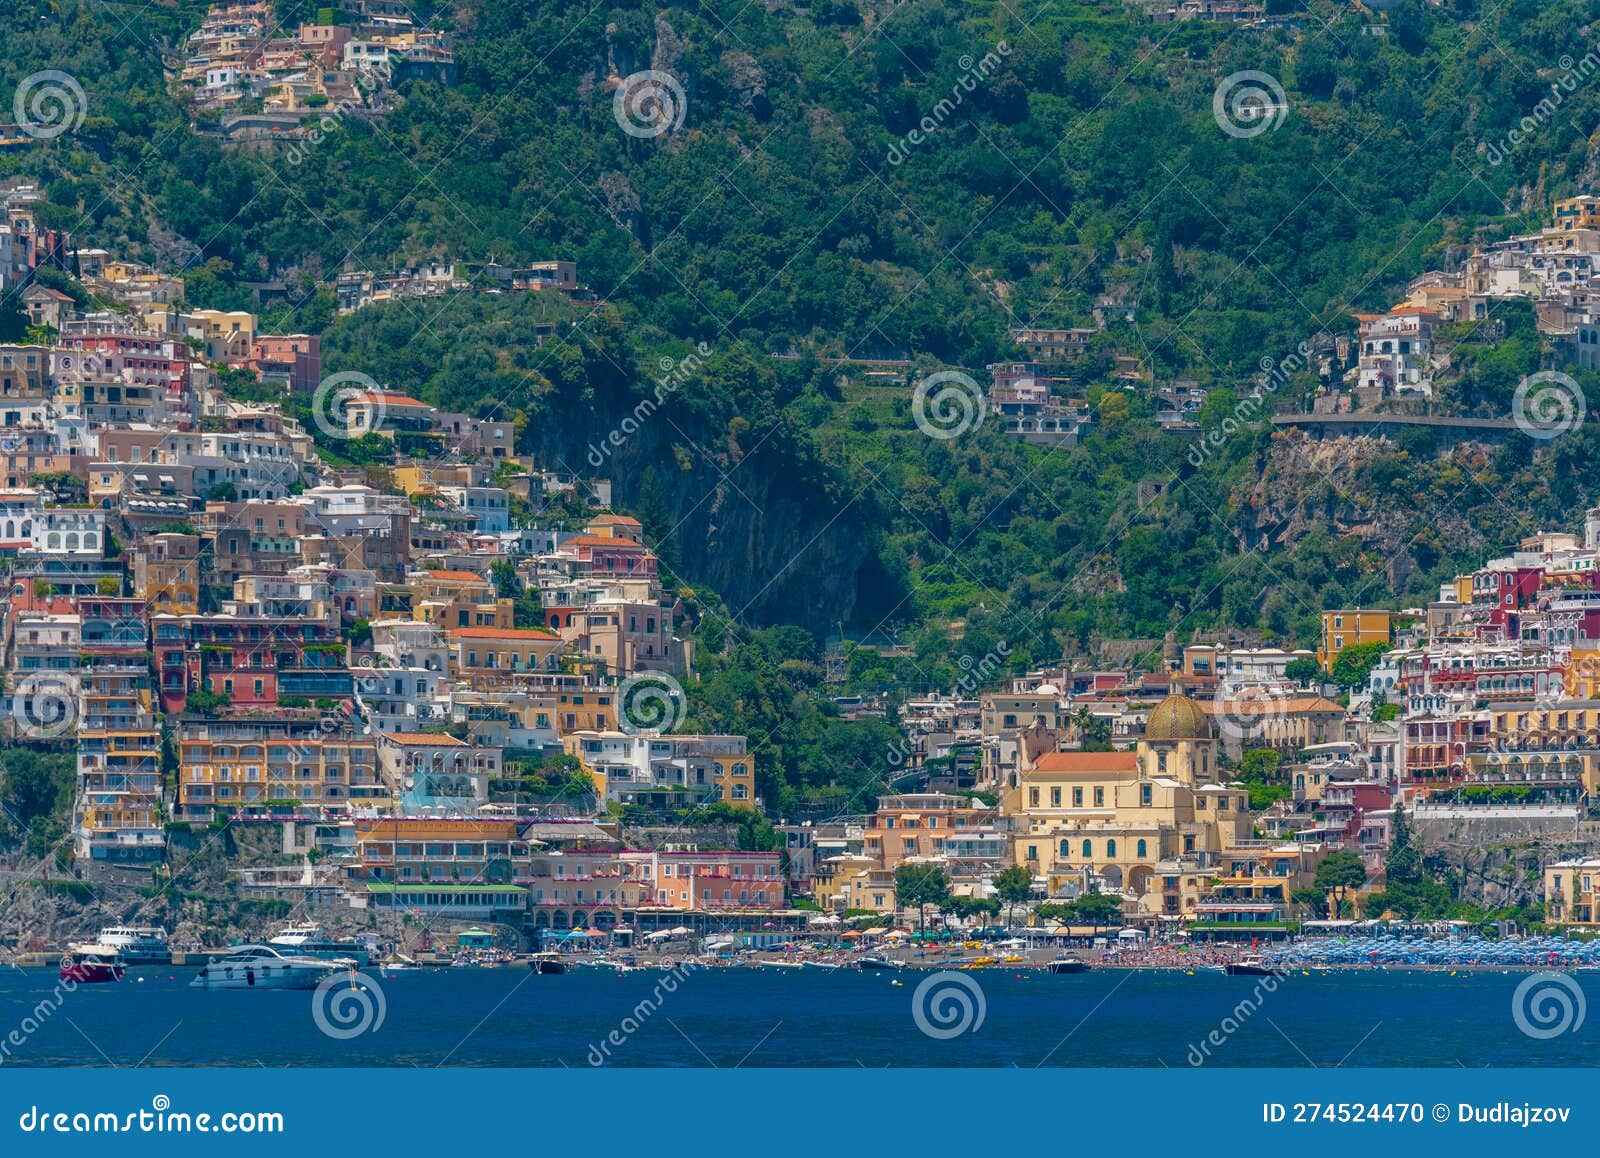 Panorama View of Positano Town in Italy Stock Photo - Image of downtown ...